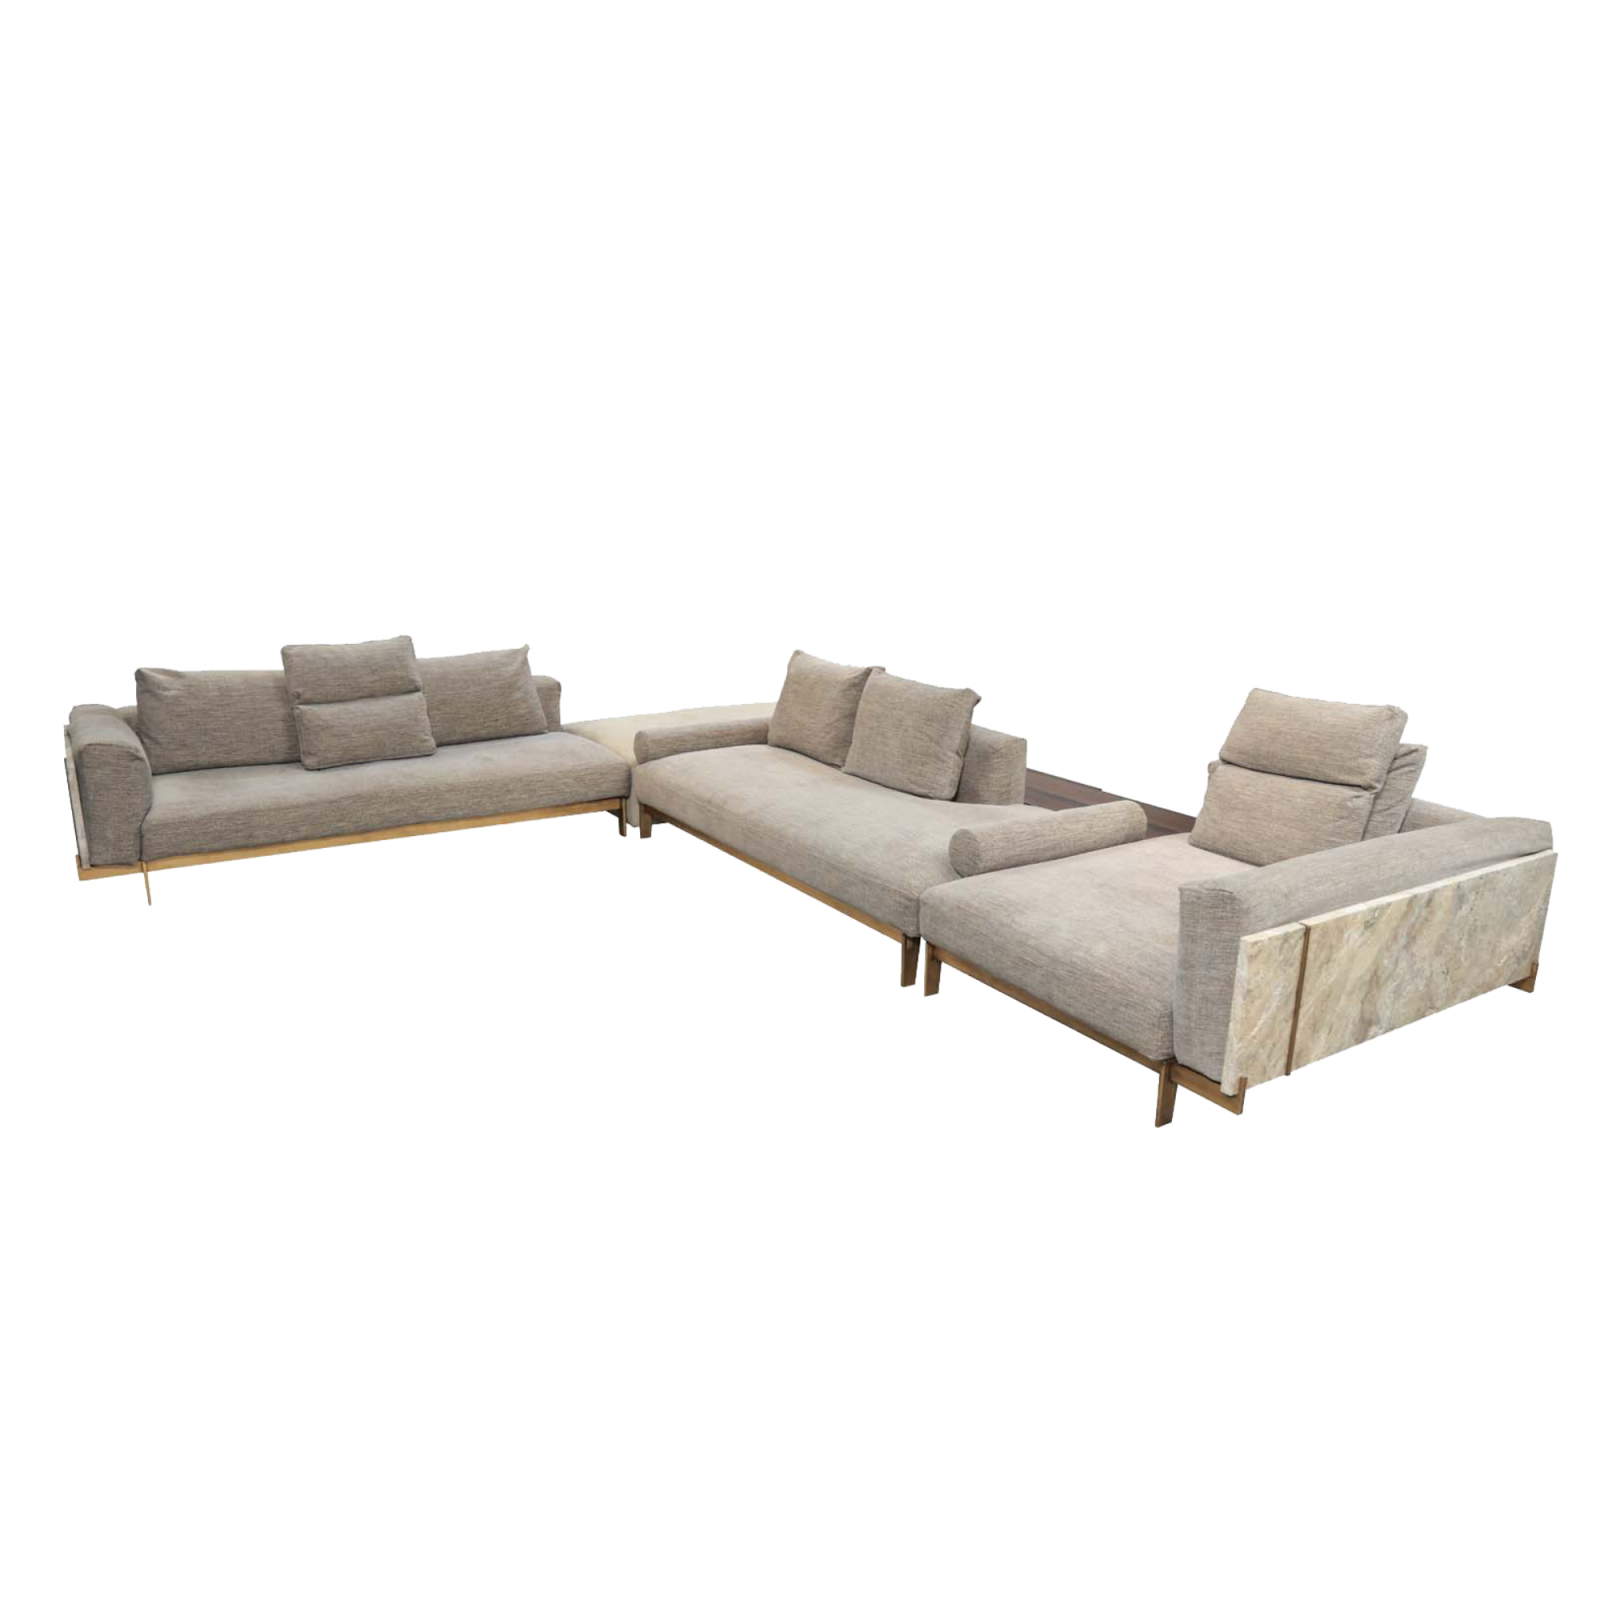 Atlantide Sofa, consisting of a combination of goose feather detailed wood and marble